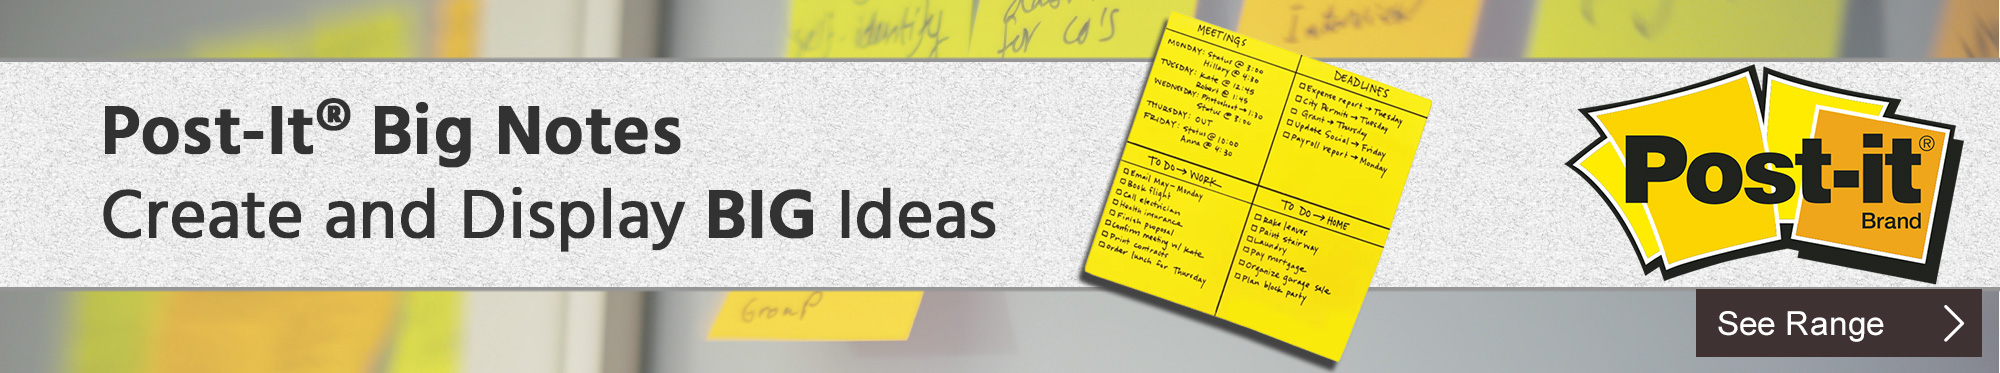 Post-it Big Notes Create and Display Big Ideas